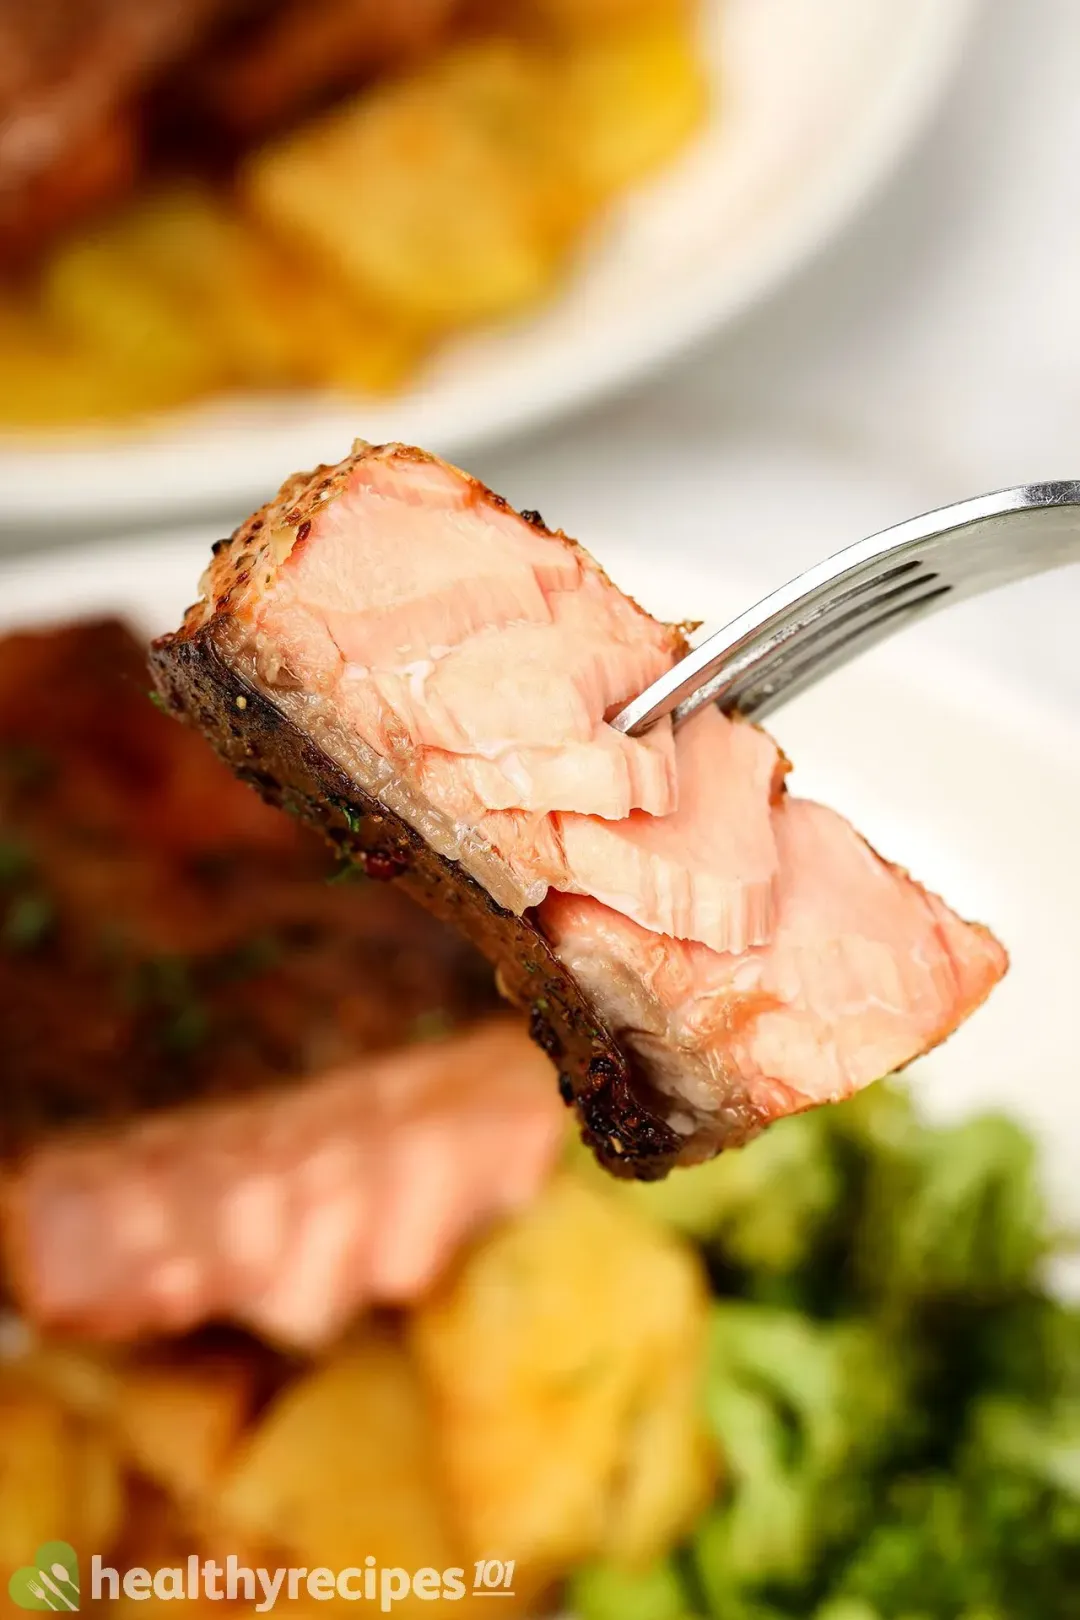 A fork piercing through a well-cooked piece of salmon whose meat is light pink and the skin is charred brown